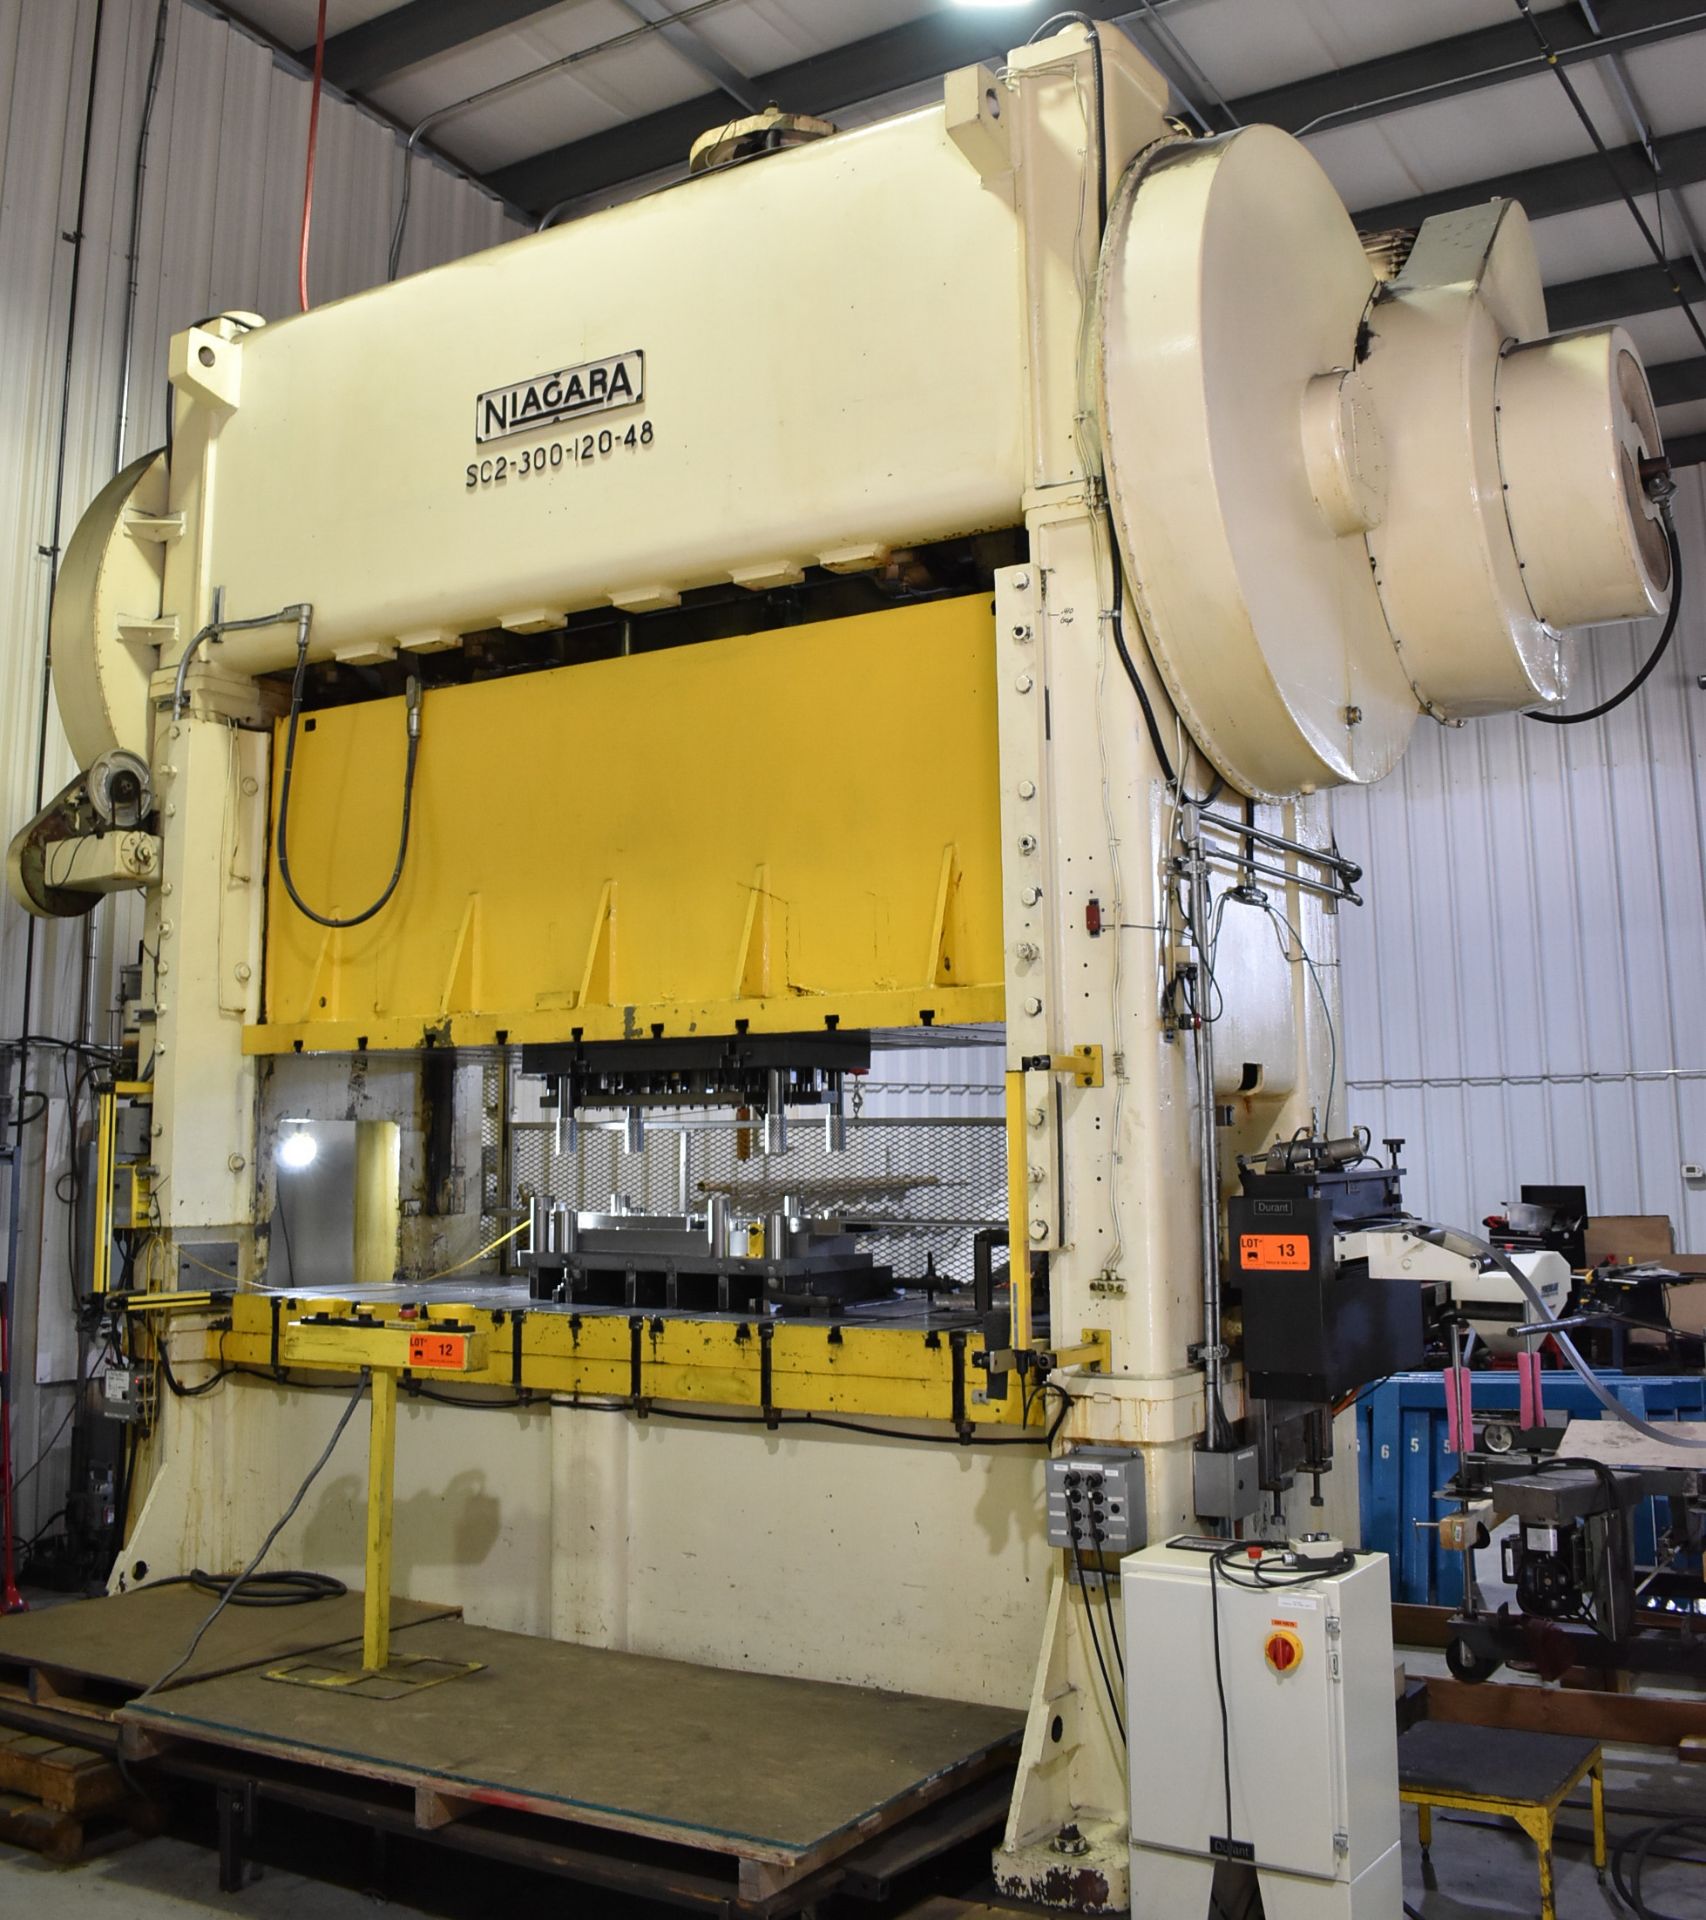 NIAGARA SC2-300-120-48 300 TON CAPACITY MECHANICAL DOUBLE CRANK STRAIGHT SIDE STAMPING PRESS WITH